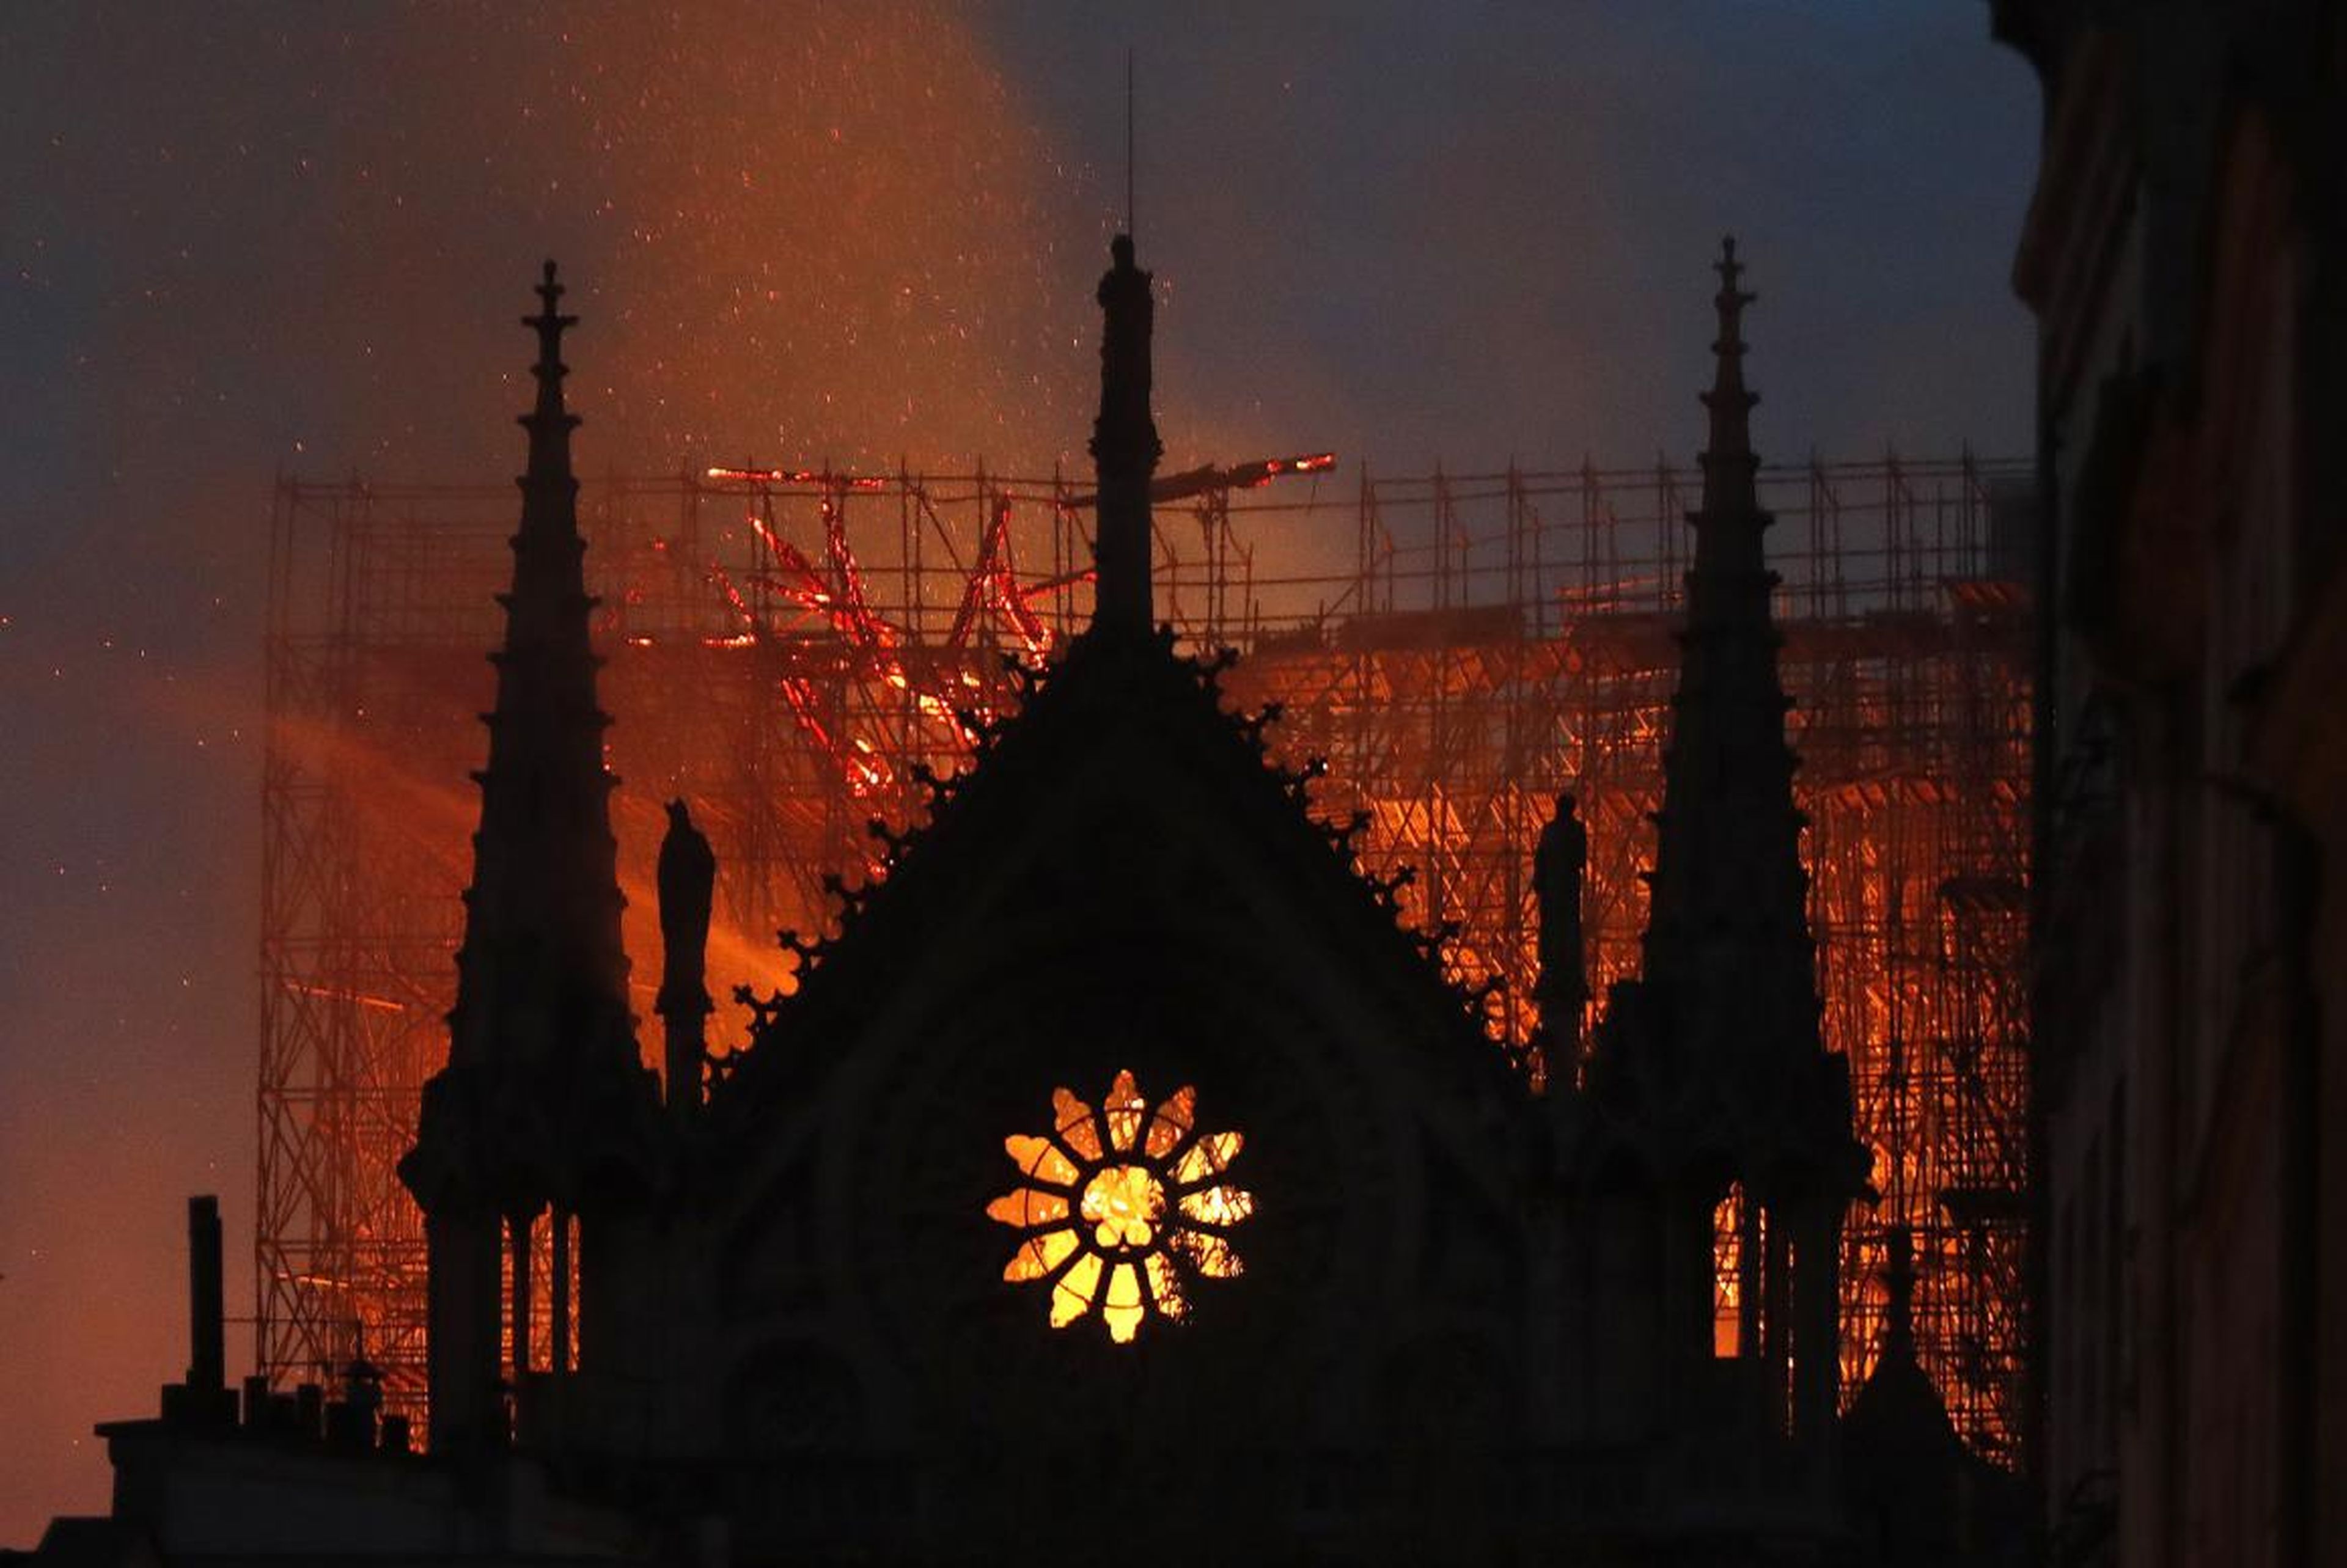 A silhouette of the Notre Dame Cathedral against the glow of the fire